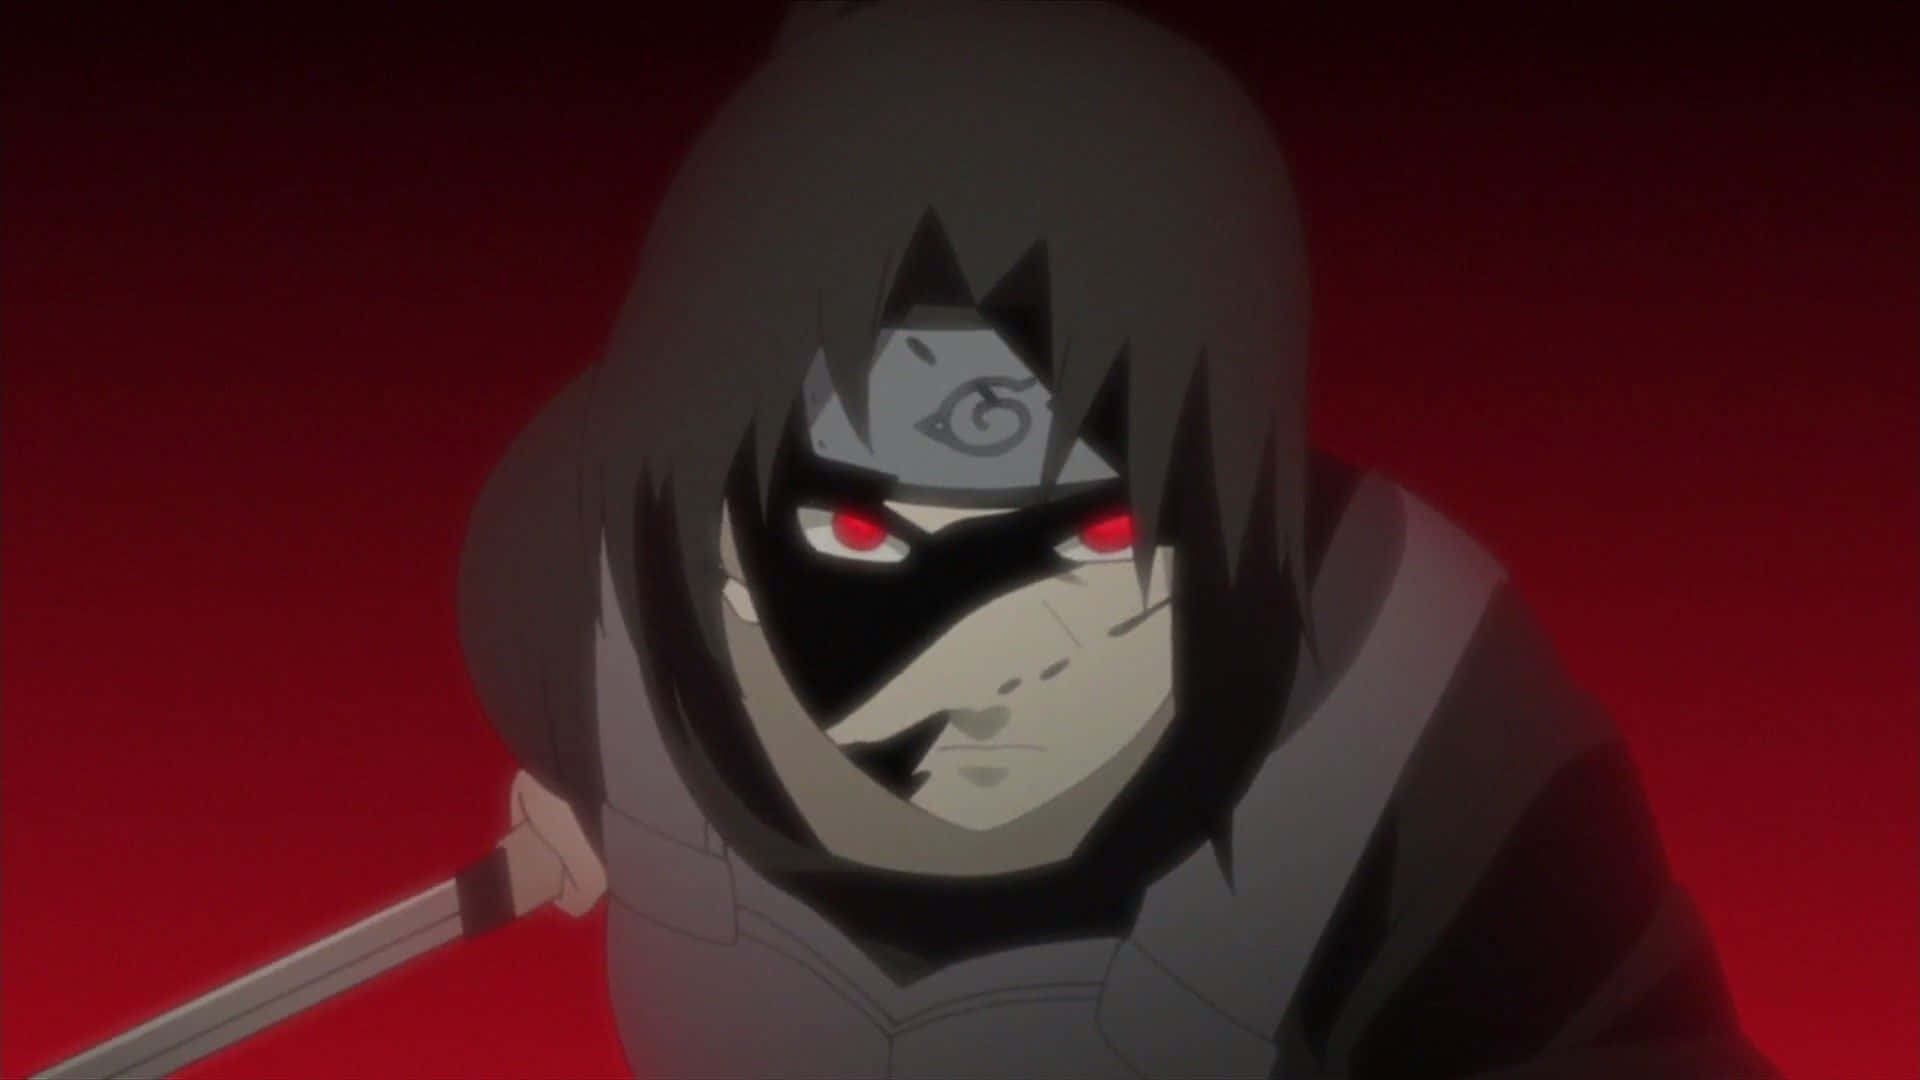 Fierce Expression Of Itachi Aesthetic Holding Sword In Black And Red Faded Backhround Background